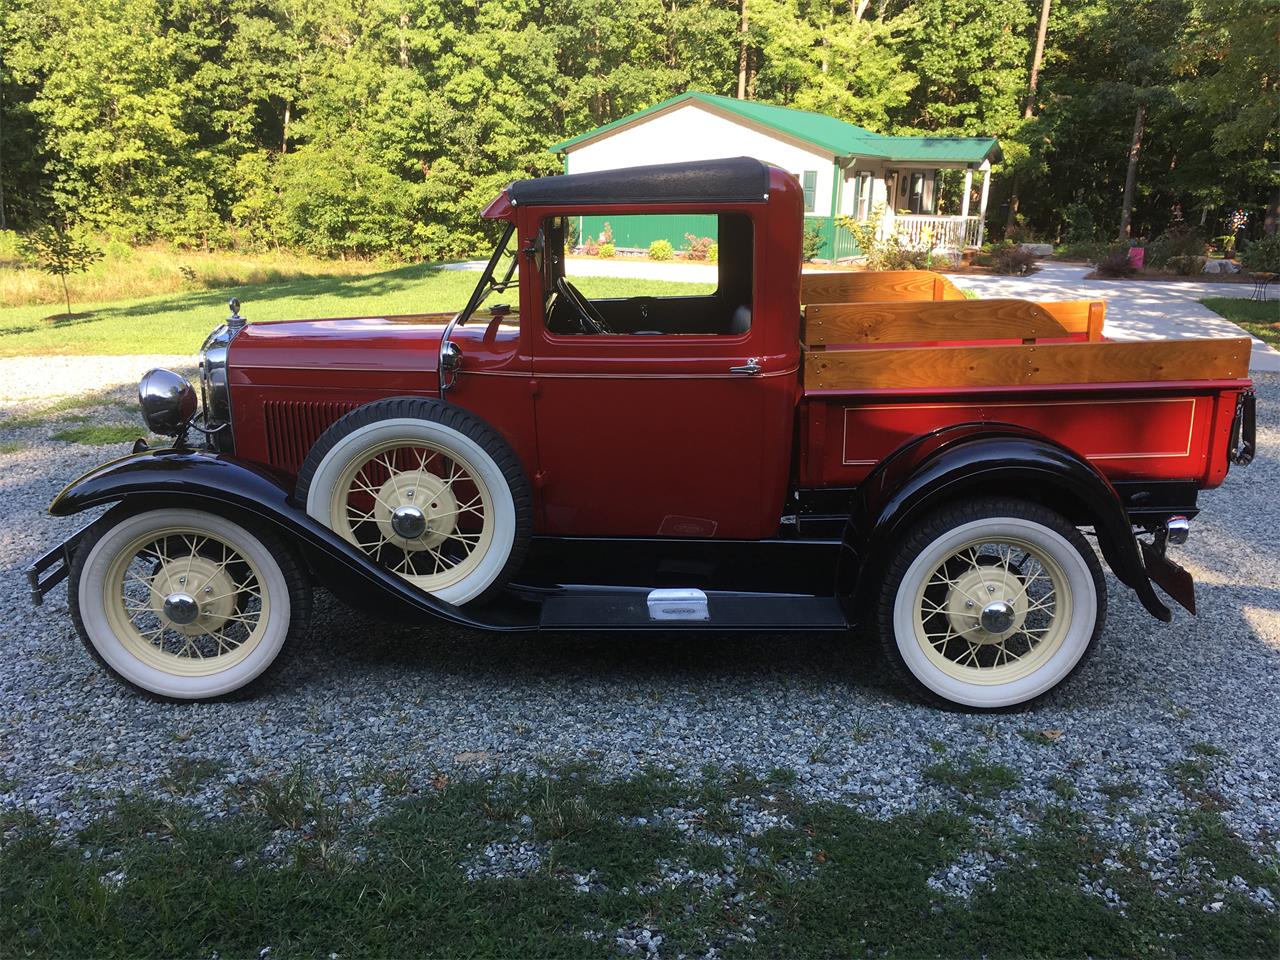 1930 Ford Pickup for Sale | ClassicCars.com | CC-1115121